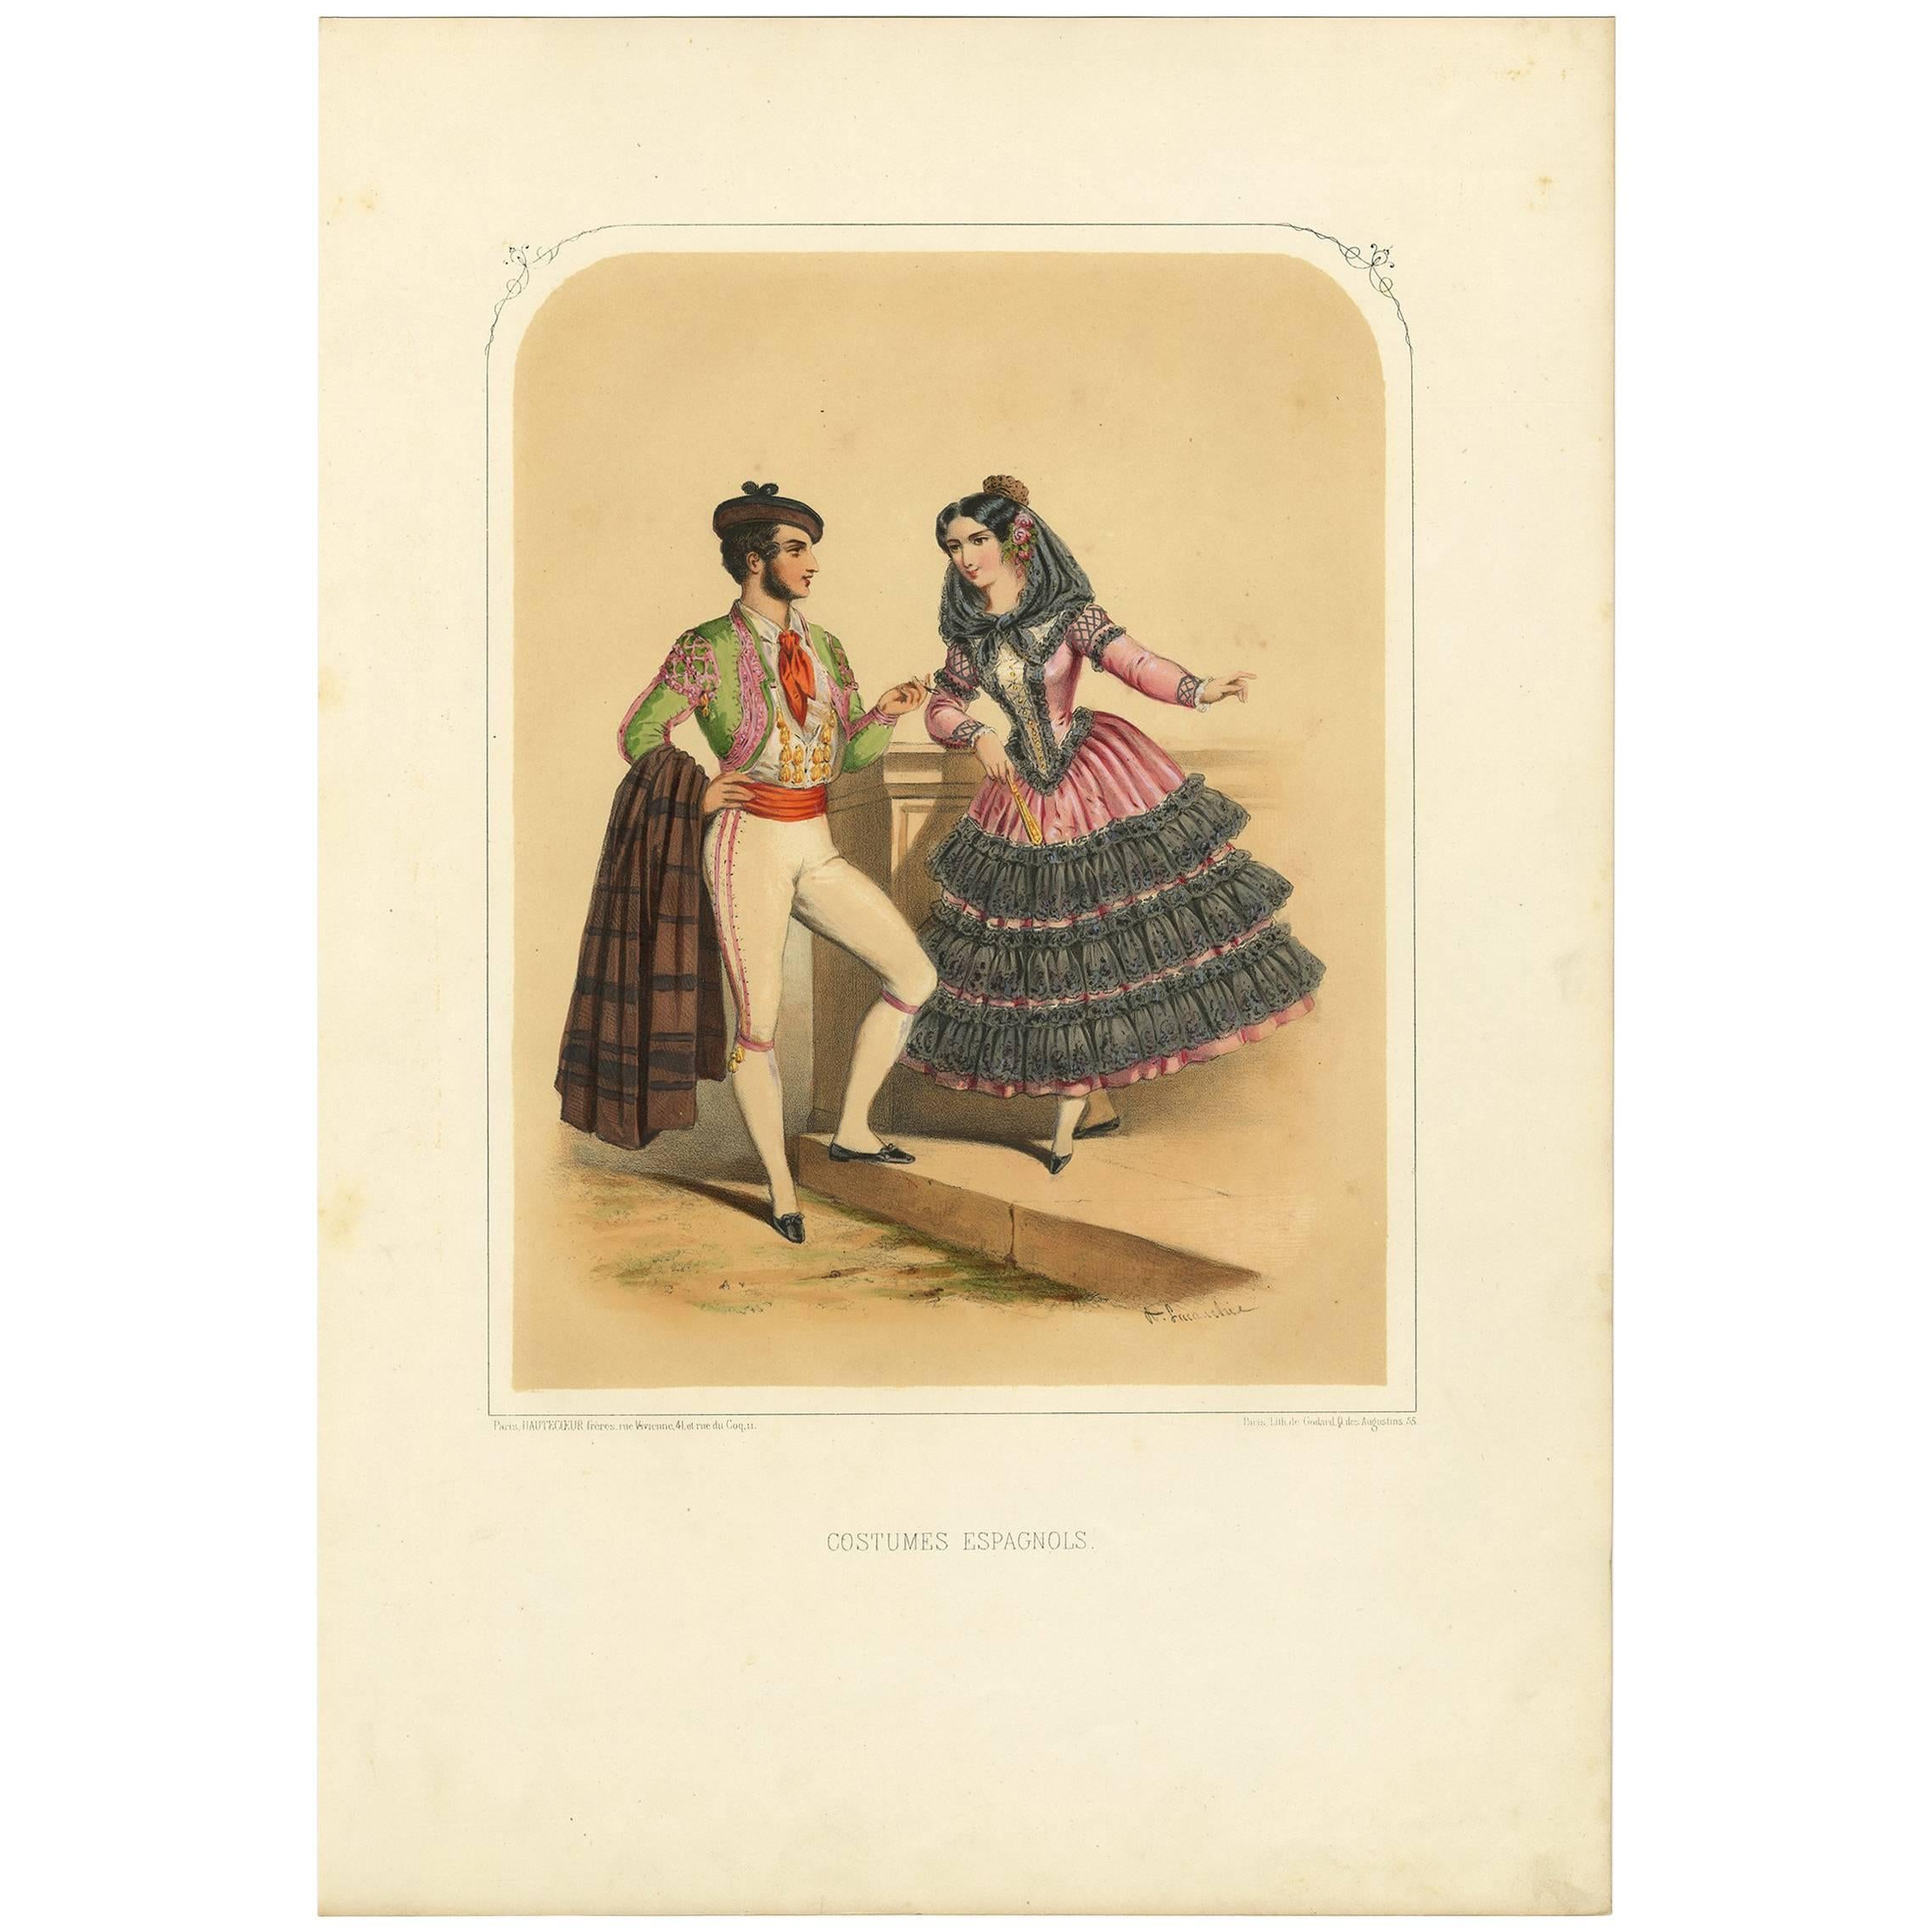 Antique Costume Print of Spain by A. Lacouchie, circa 1850